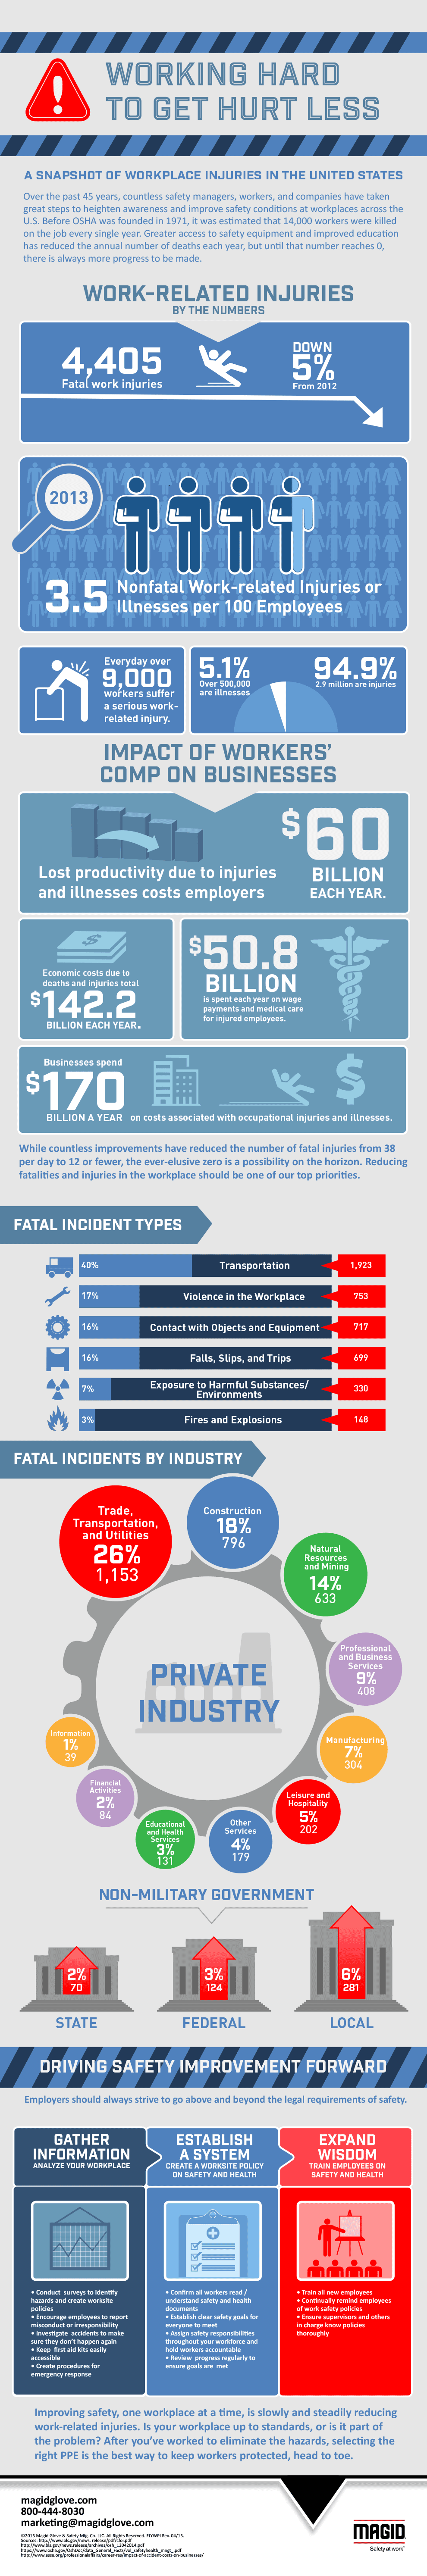 workplace-injuries-infographic